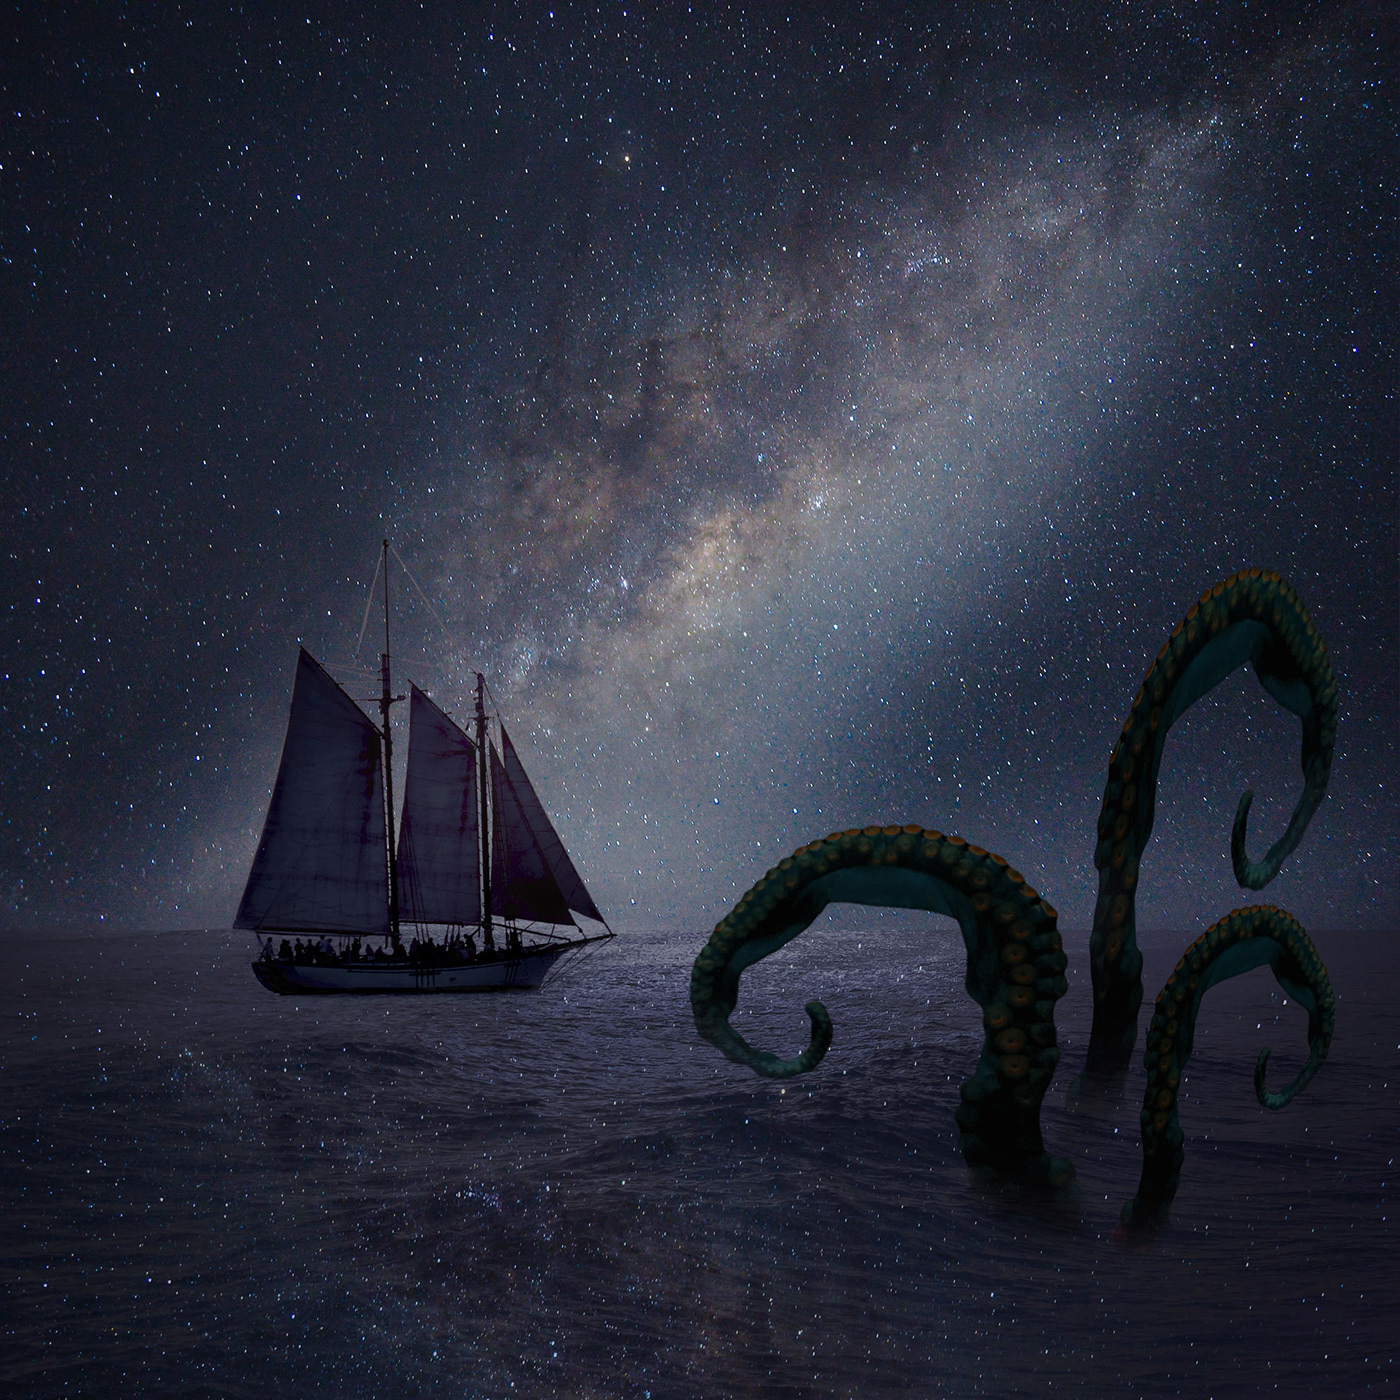 impossible Ocean photoshop Pirates of the Caribbean starry sky